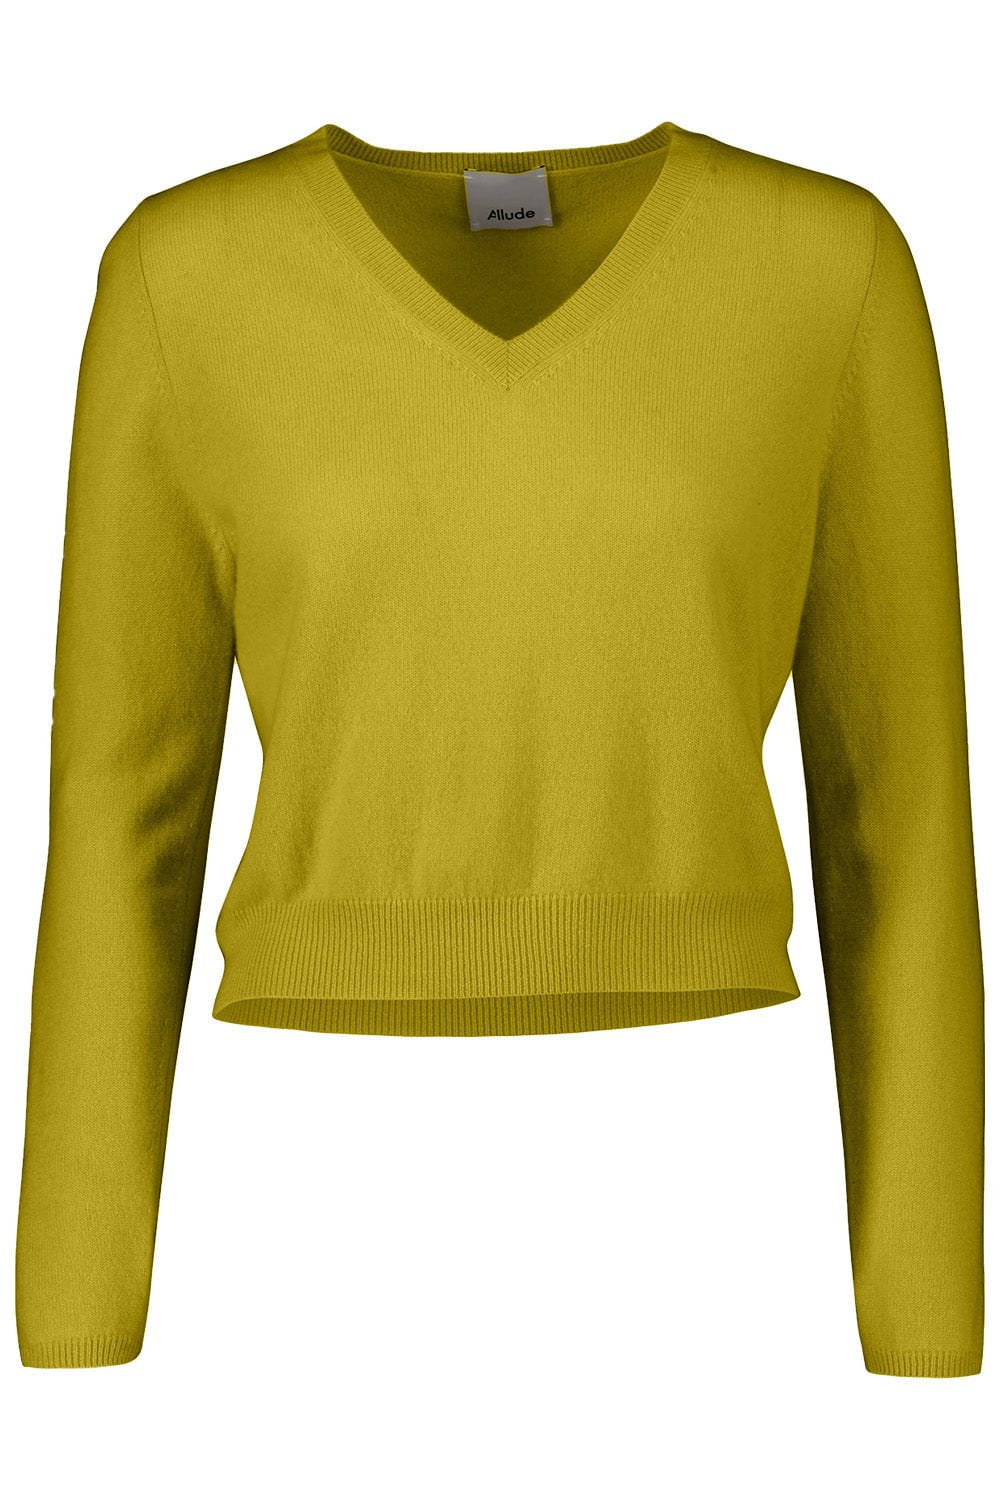 ALLUDE-V-Sweater - Chartreuse-